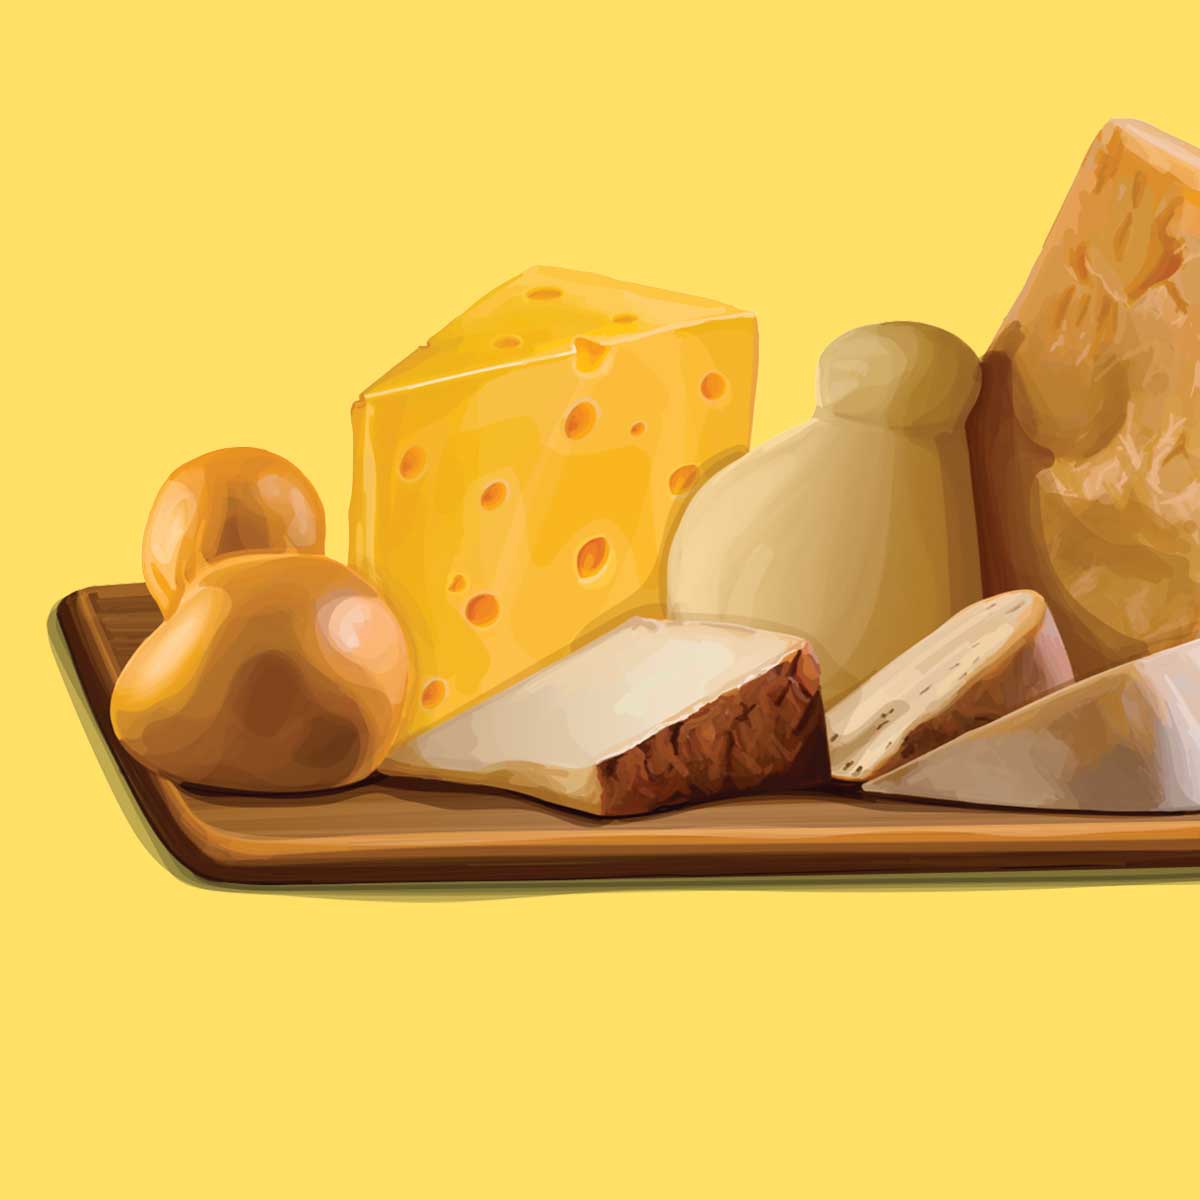 A variety of homemade cheese on a cutting board, including provolne, swiss and cheddar.